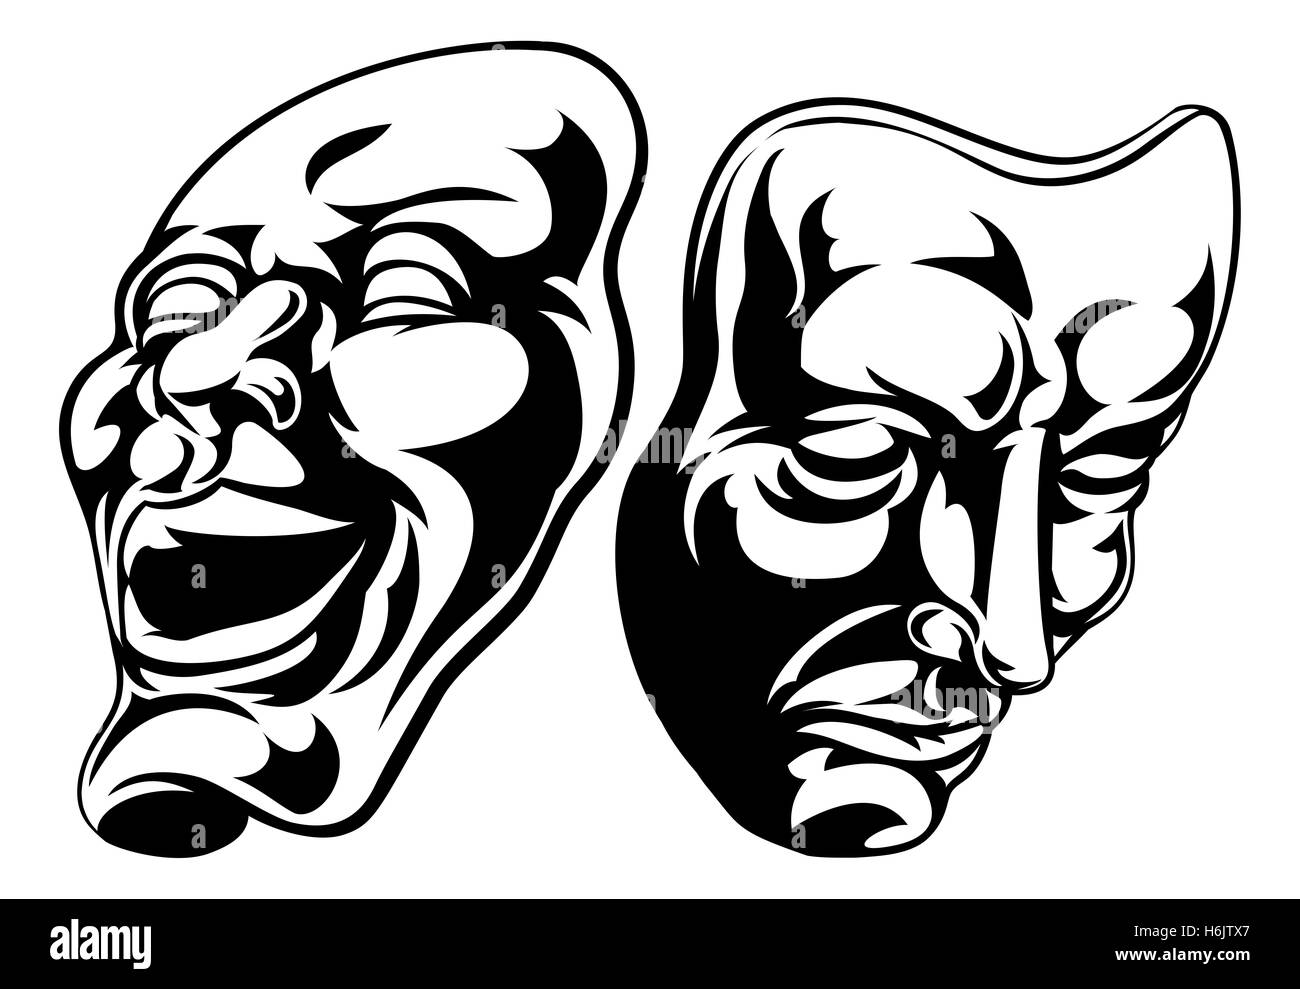 Illustration of theatre comedy and tragedy masks Stock Photo